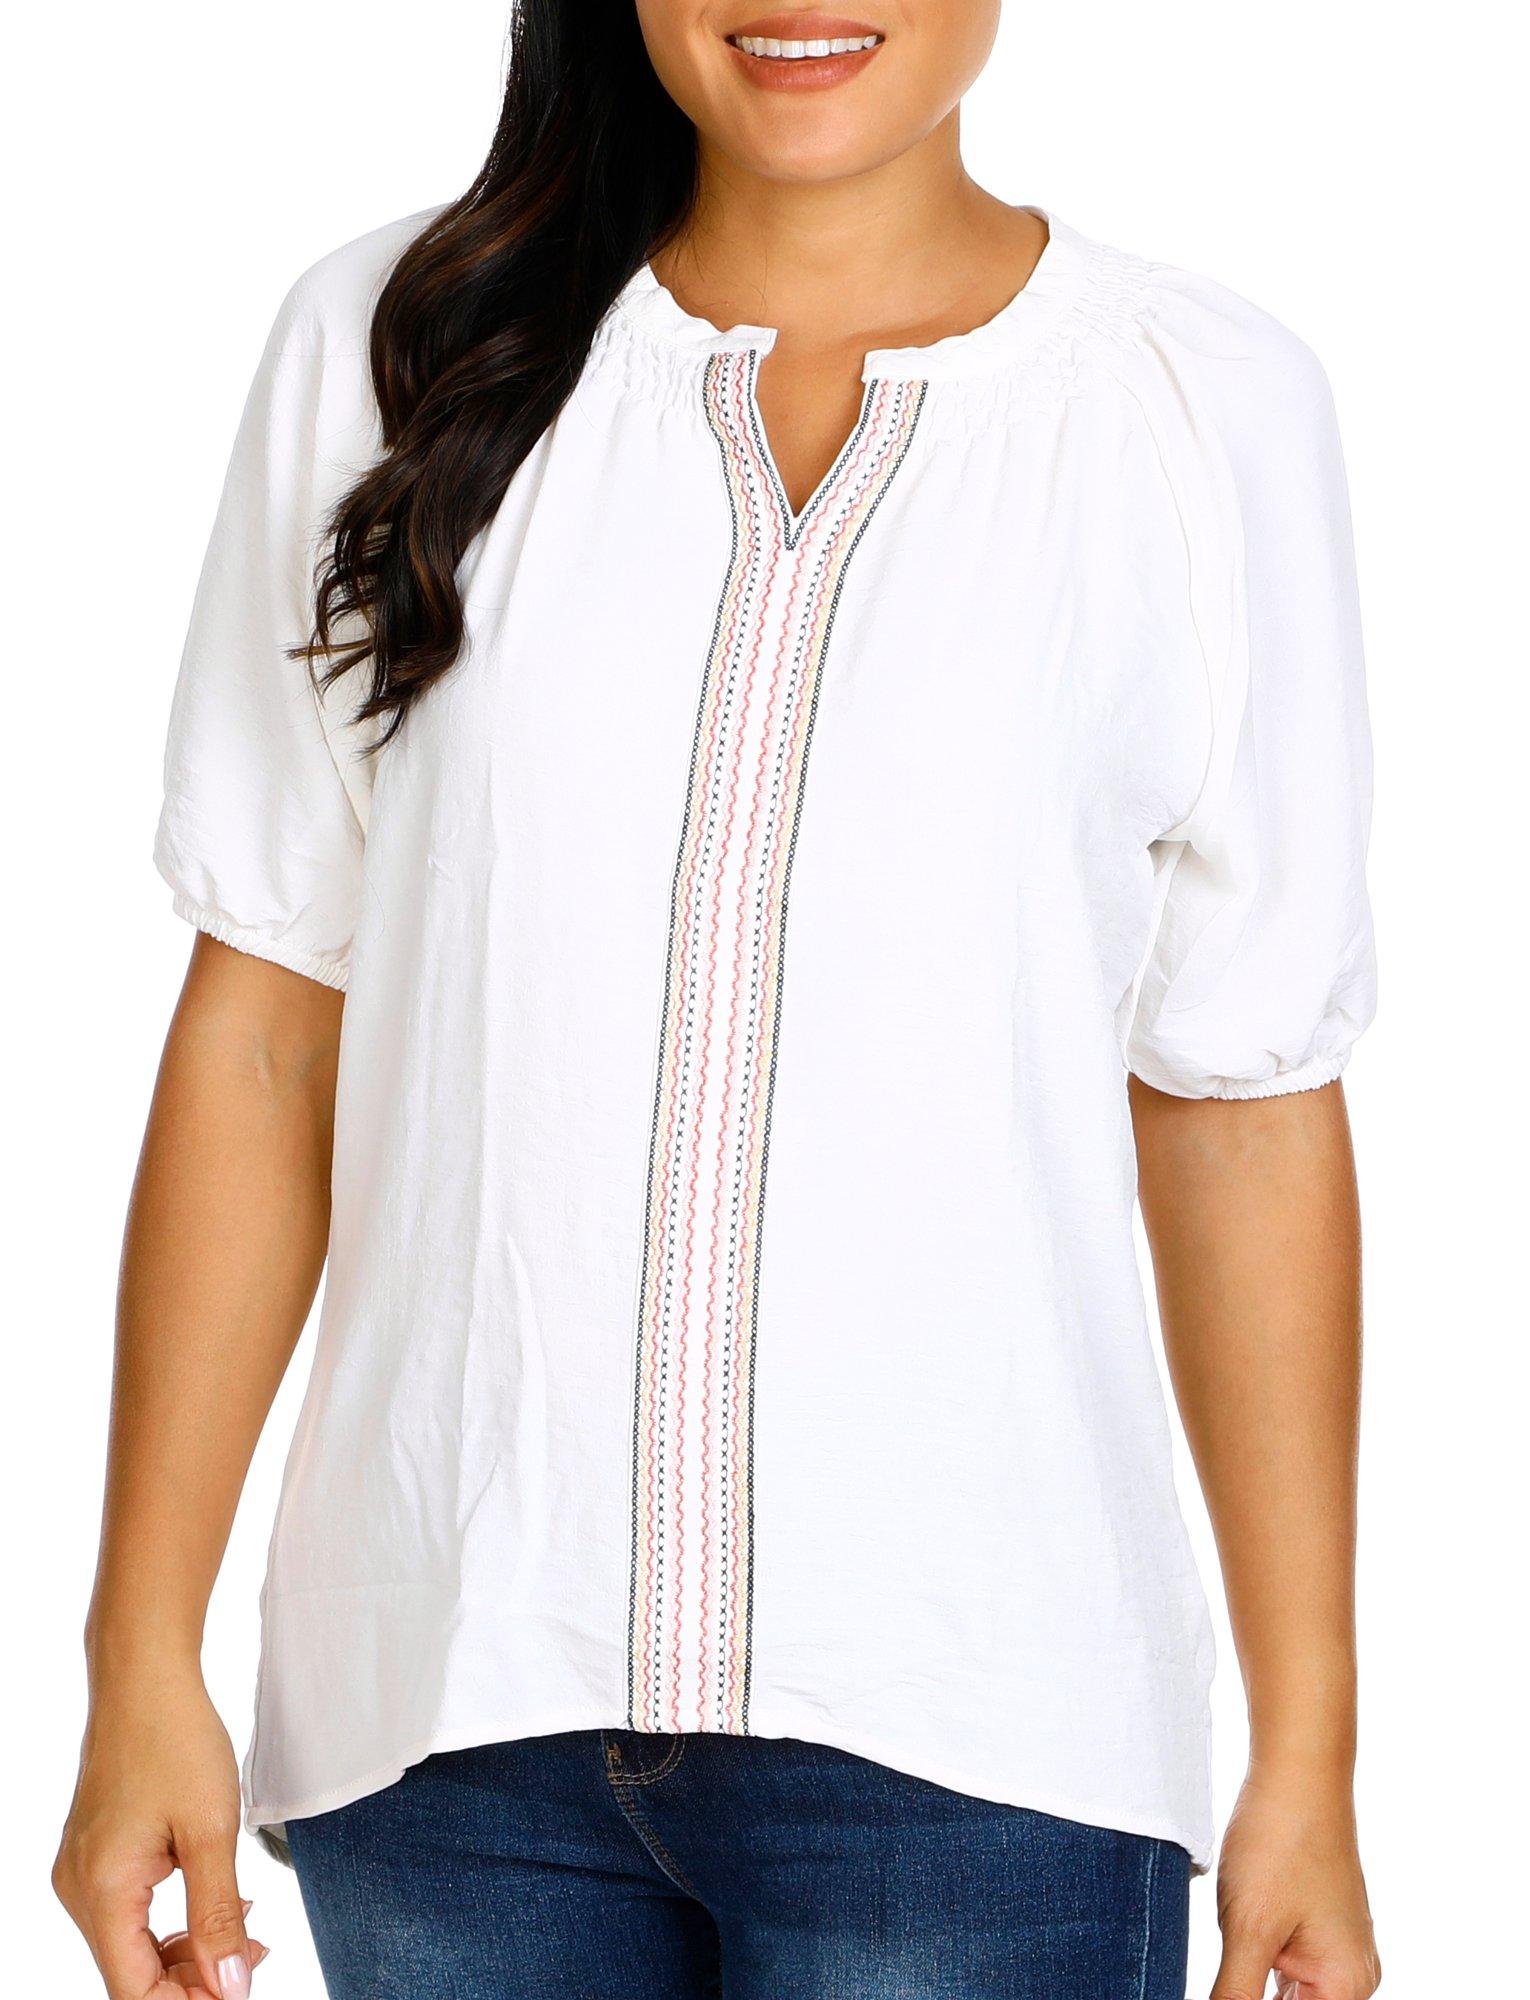 Women's Embroidered Woven Top